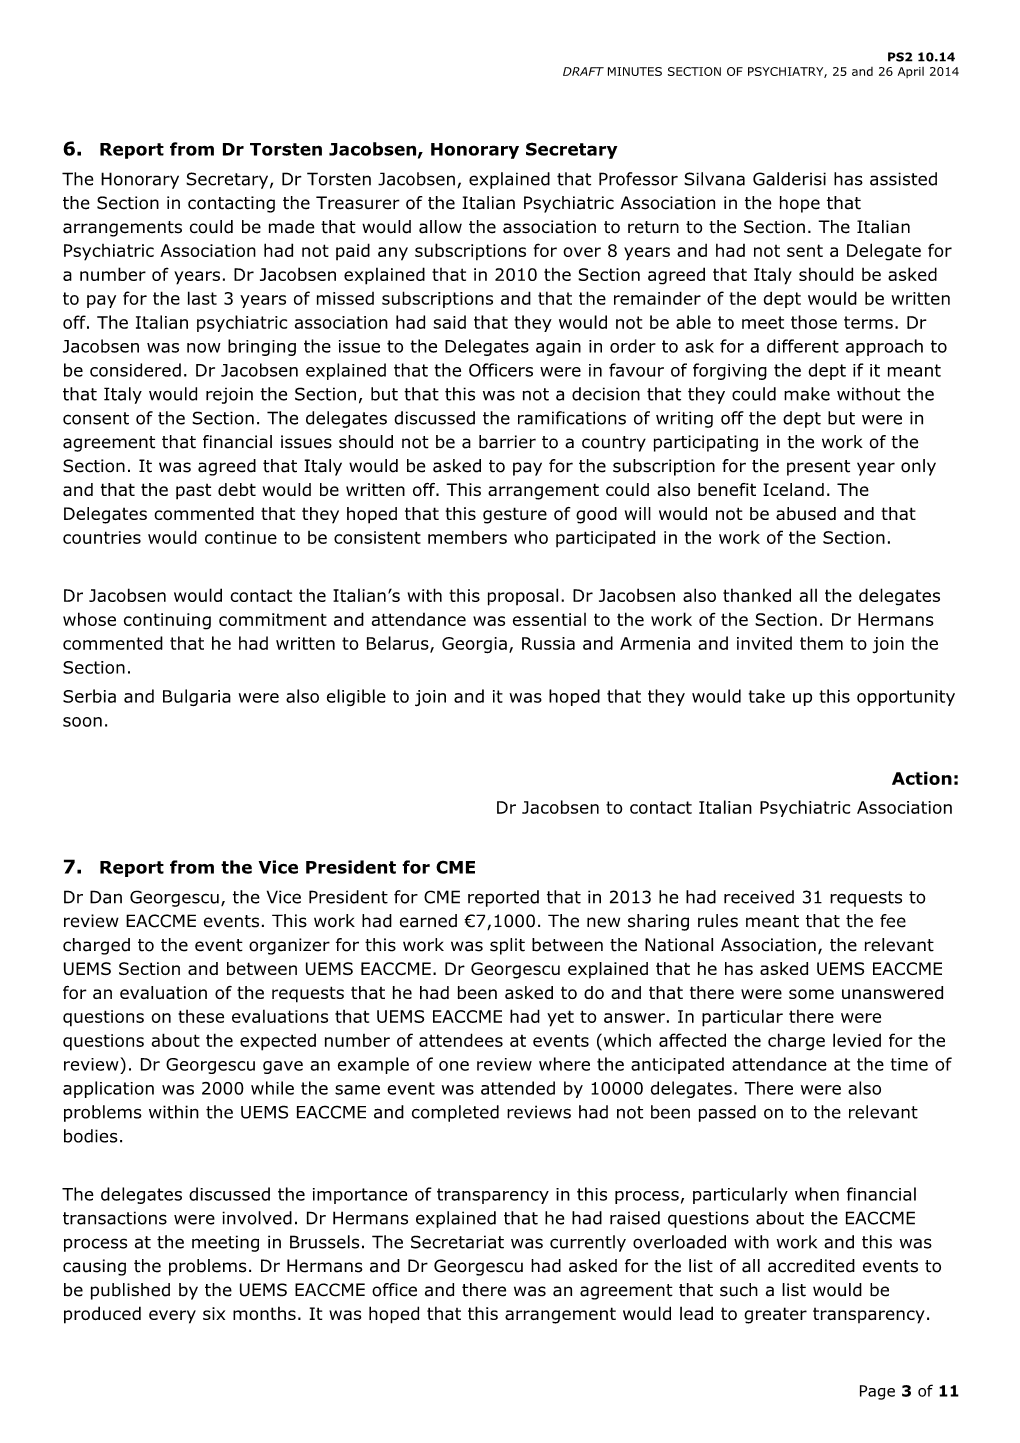 DRAFT MINUTES SECTION of PSYCHIATRY, 25 and 26 April 2014